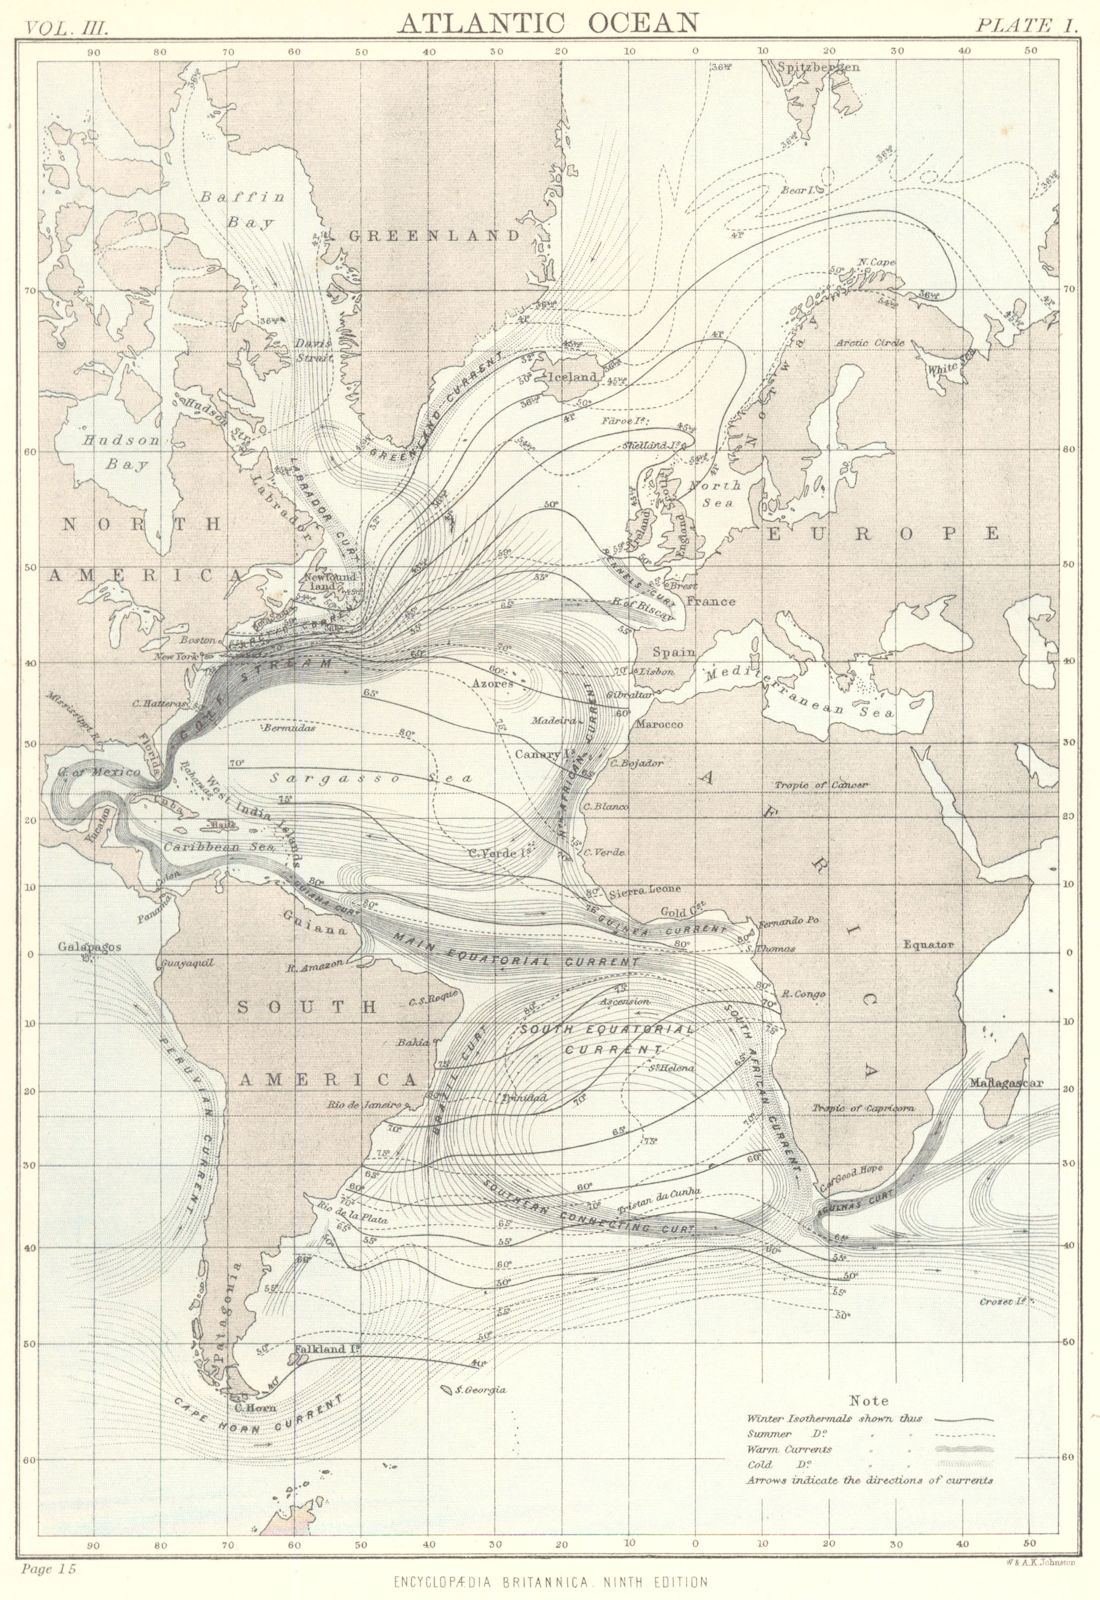 ATLANTIC OCEAN. Showing currents & isothermals. Britannica 9th edition 1898 map